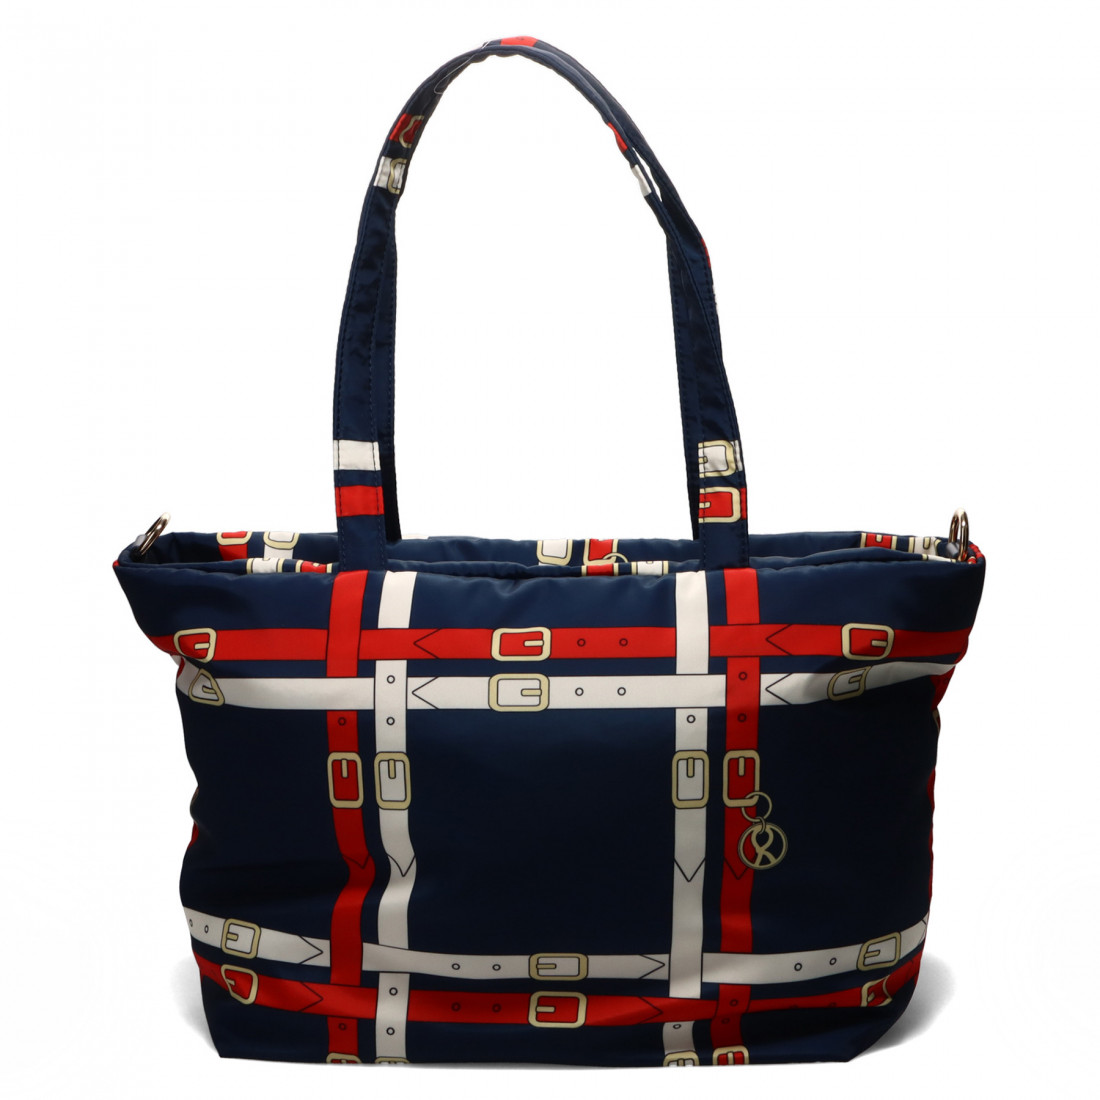 Roberta di Camerino Doublet Bag blue and red